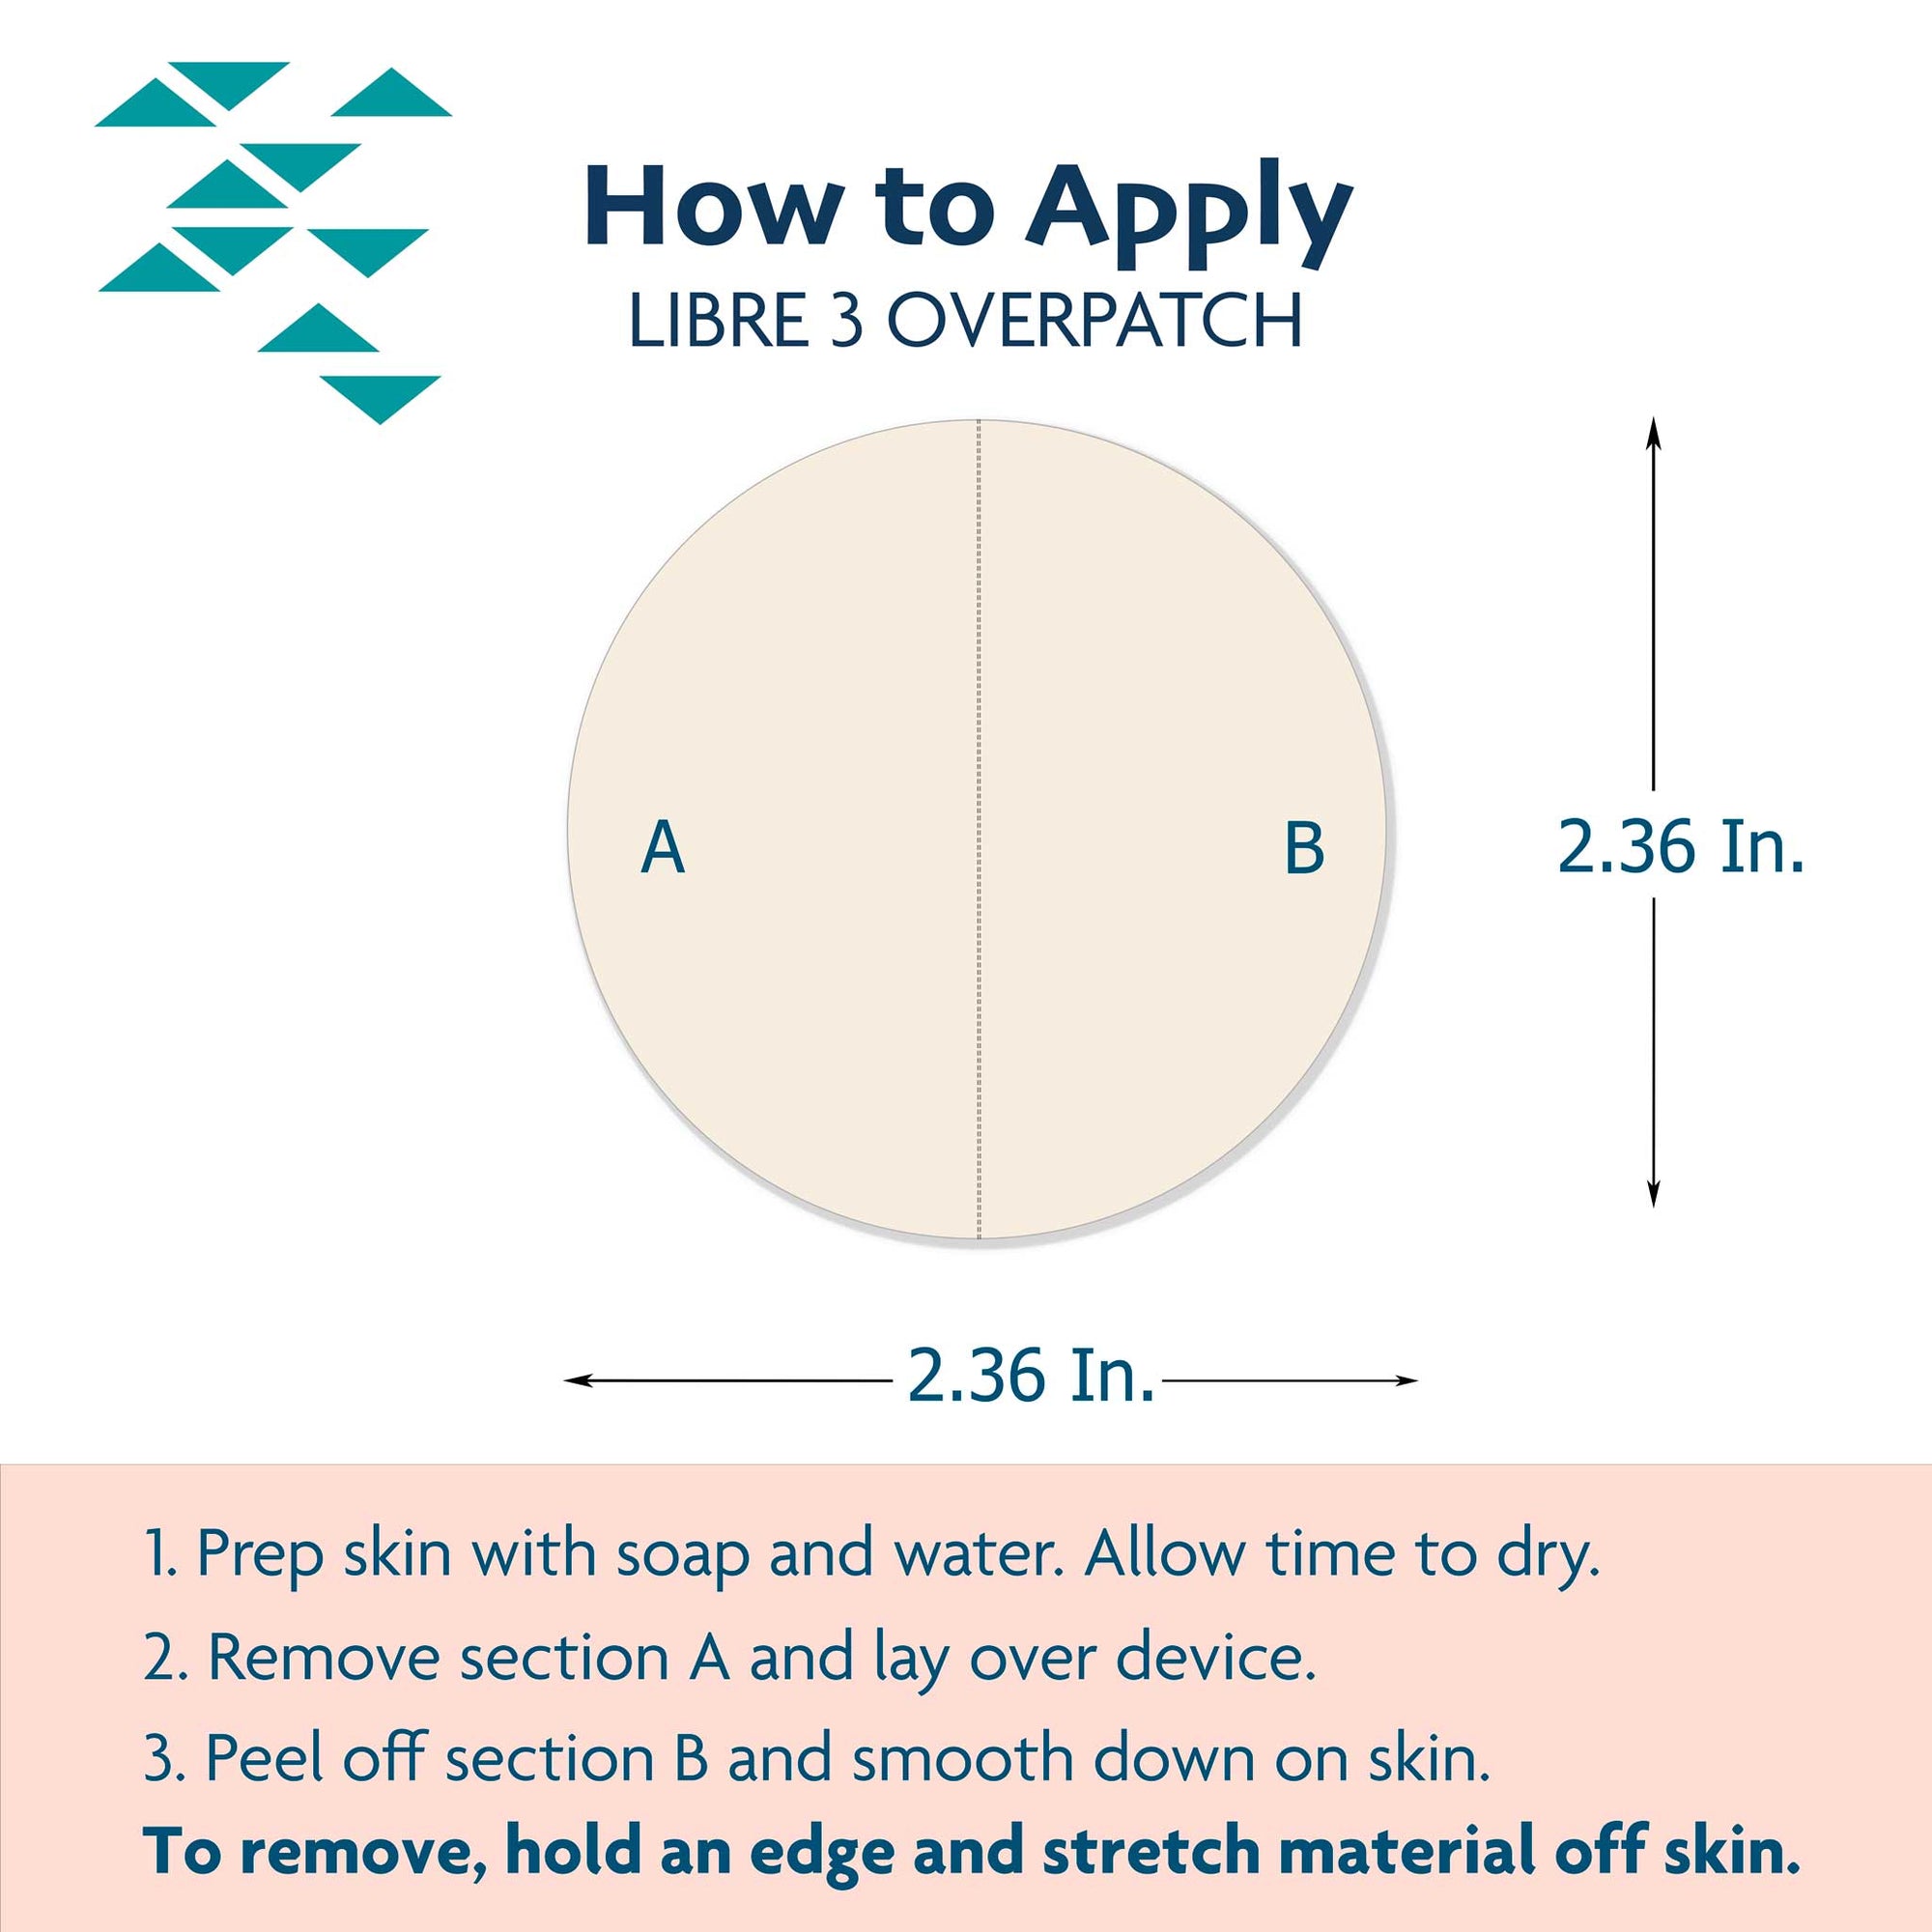 ExpressionMed Libre 3 Overpatch Adhesive Tape Application instructions and Dimensions